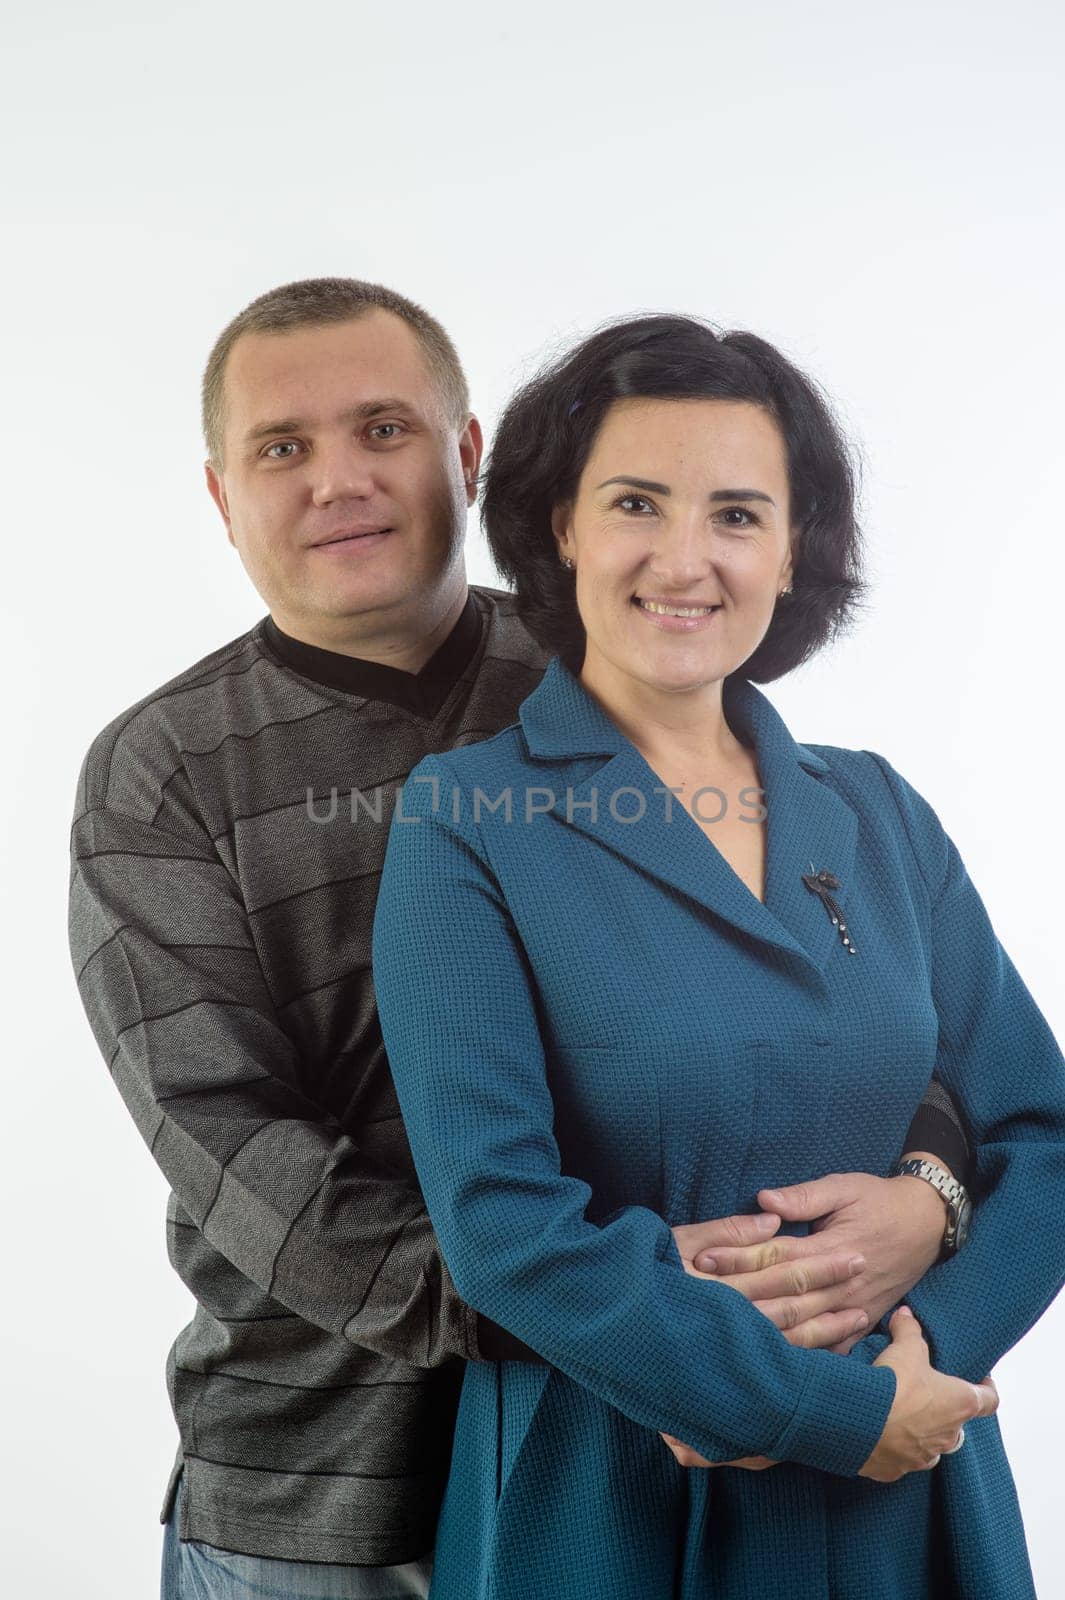 studio portrait of husband and wife happy family 3 by Mixa74